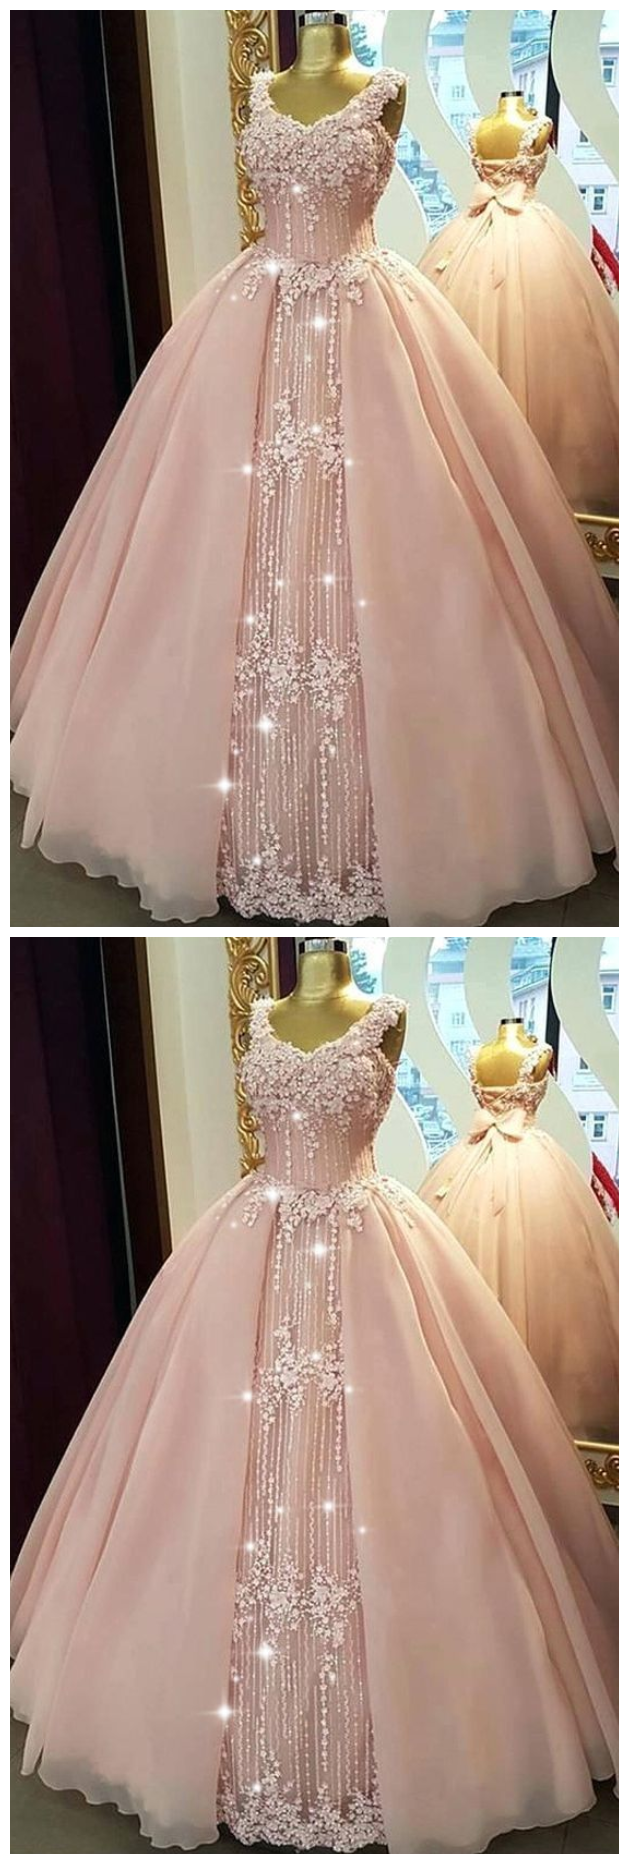 Fabulous Tulle & Organza V-neck Neckline Floor-length Ball Gown Quinceanera Dresses With Beaded Lace